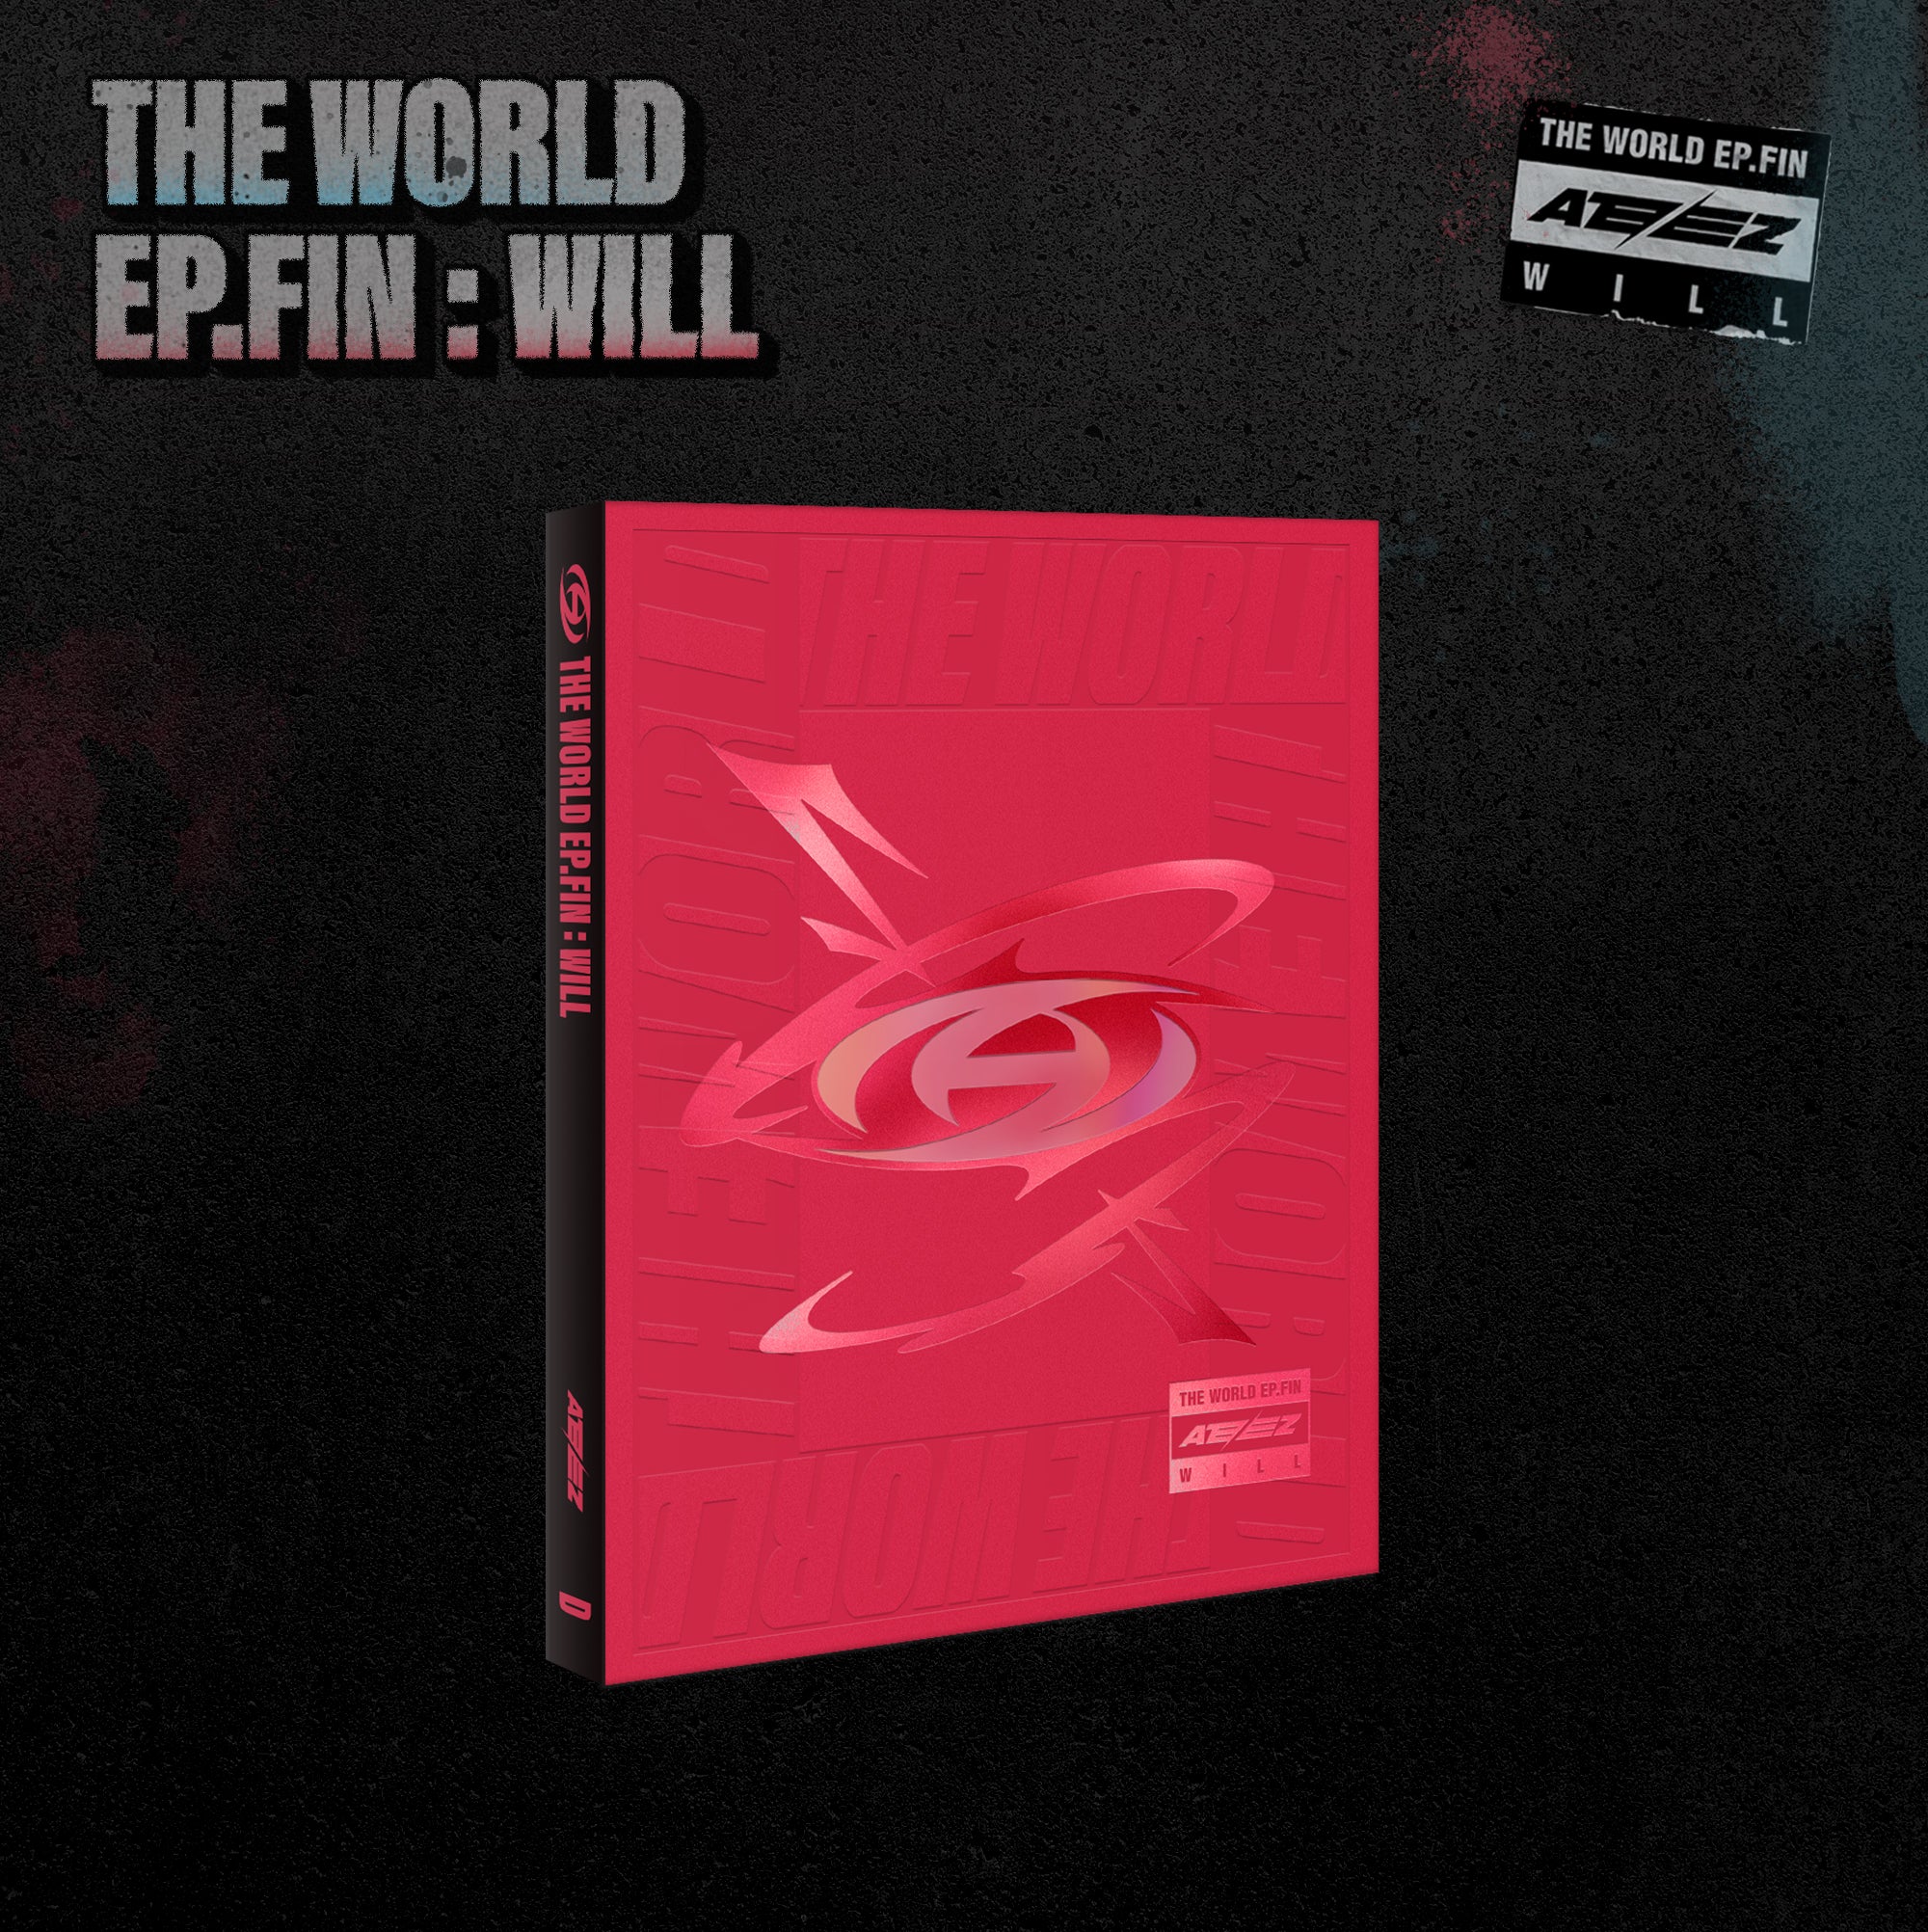 ATEEZ - THE WORLD EP.FIN WILL